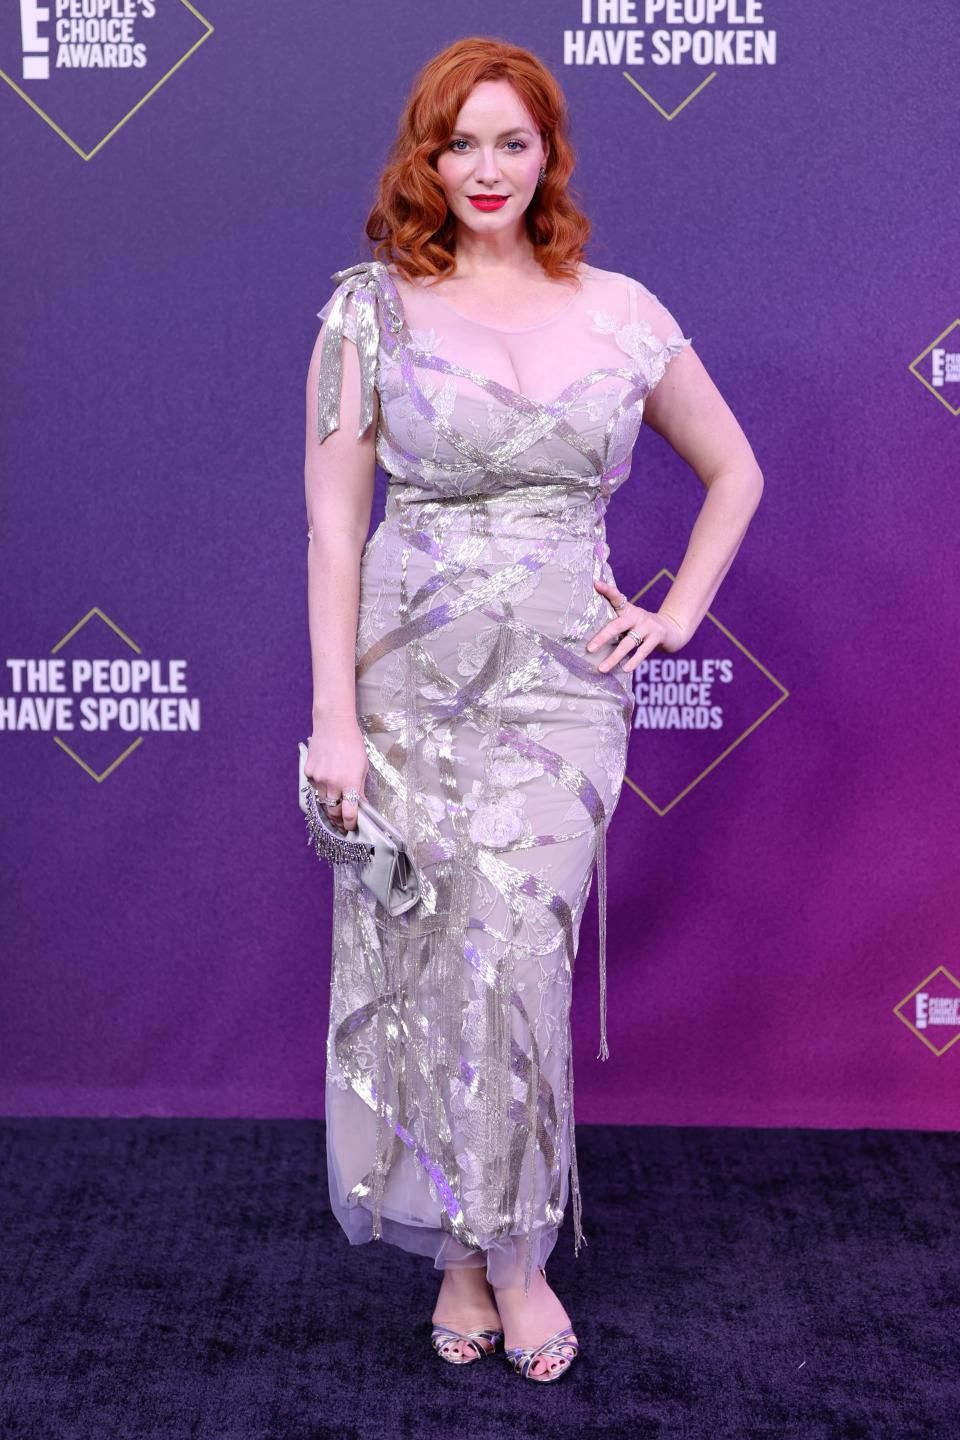 <h2>Christina Hendricks in Marchesa<br></h2><br><em>Mad Men</em> star Christina Hendricks paired her Old Hollywood-esque curls and red lip with a sparkling silver dress by Marchesa. <br><br><span class="copyright">Photo: Rich Polk/E! Entertainment/NBCU Photo Bank via Getty Images</span>